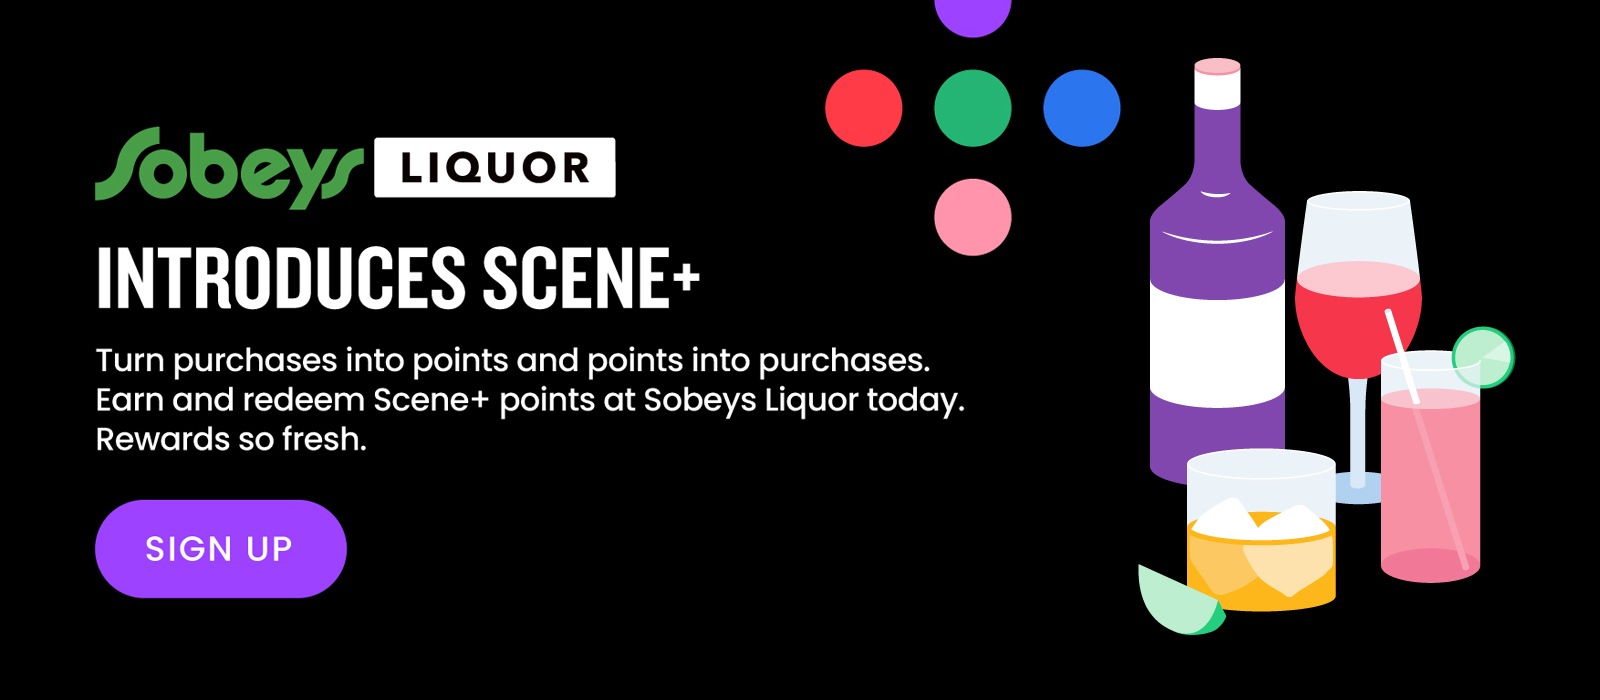 Text Reading 'Sobeys Liquor introduces Scene+ Turn purchases into points and points into purchases. Earn and redeem Scene+ points at Sobeys Liquor today. Rewards so fresh. Click on the button given below to 'Sign Up'.'